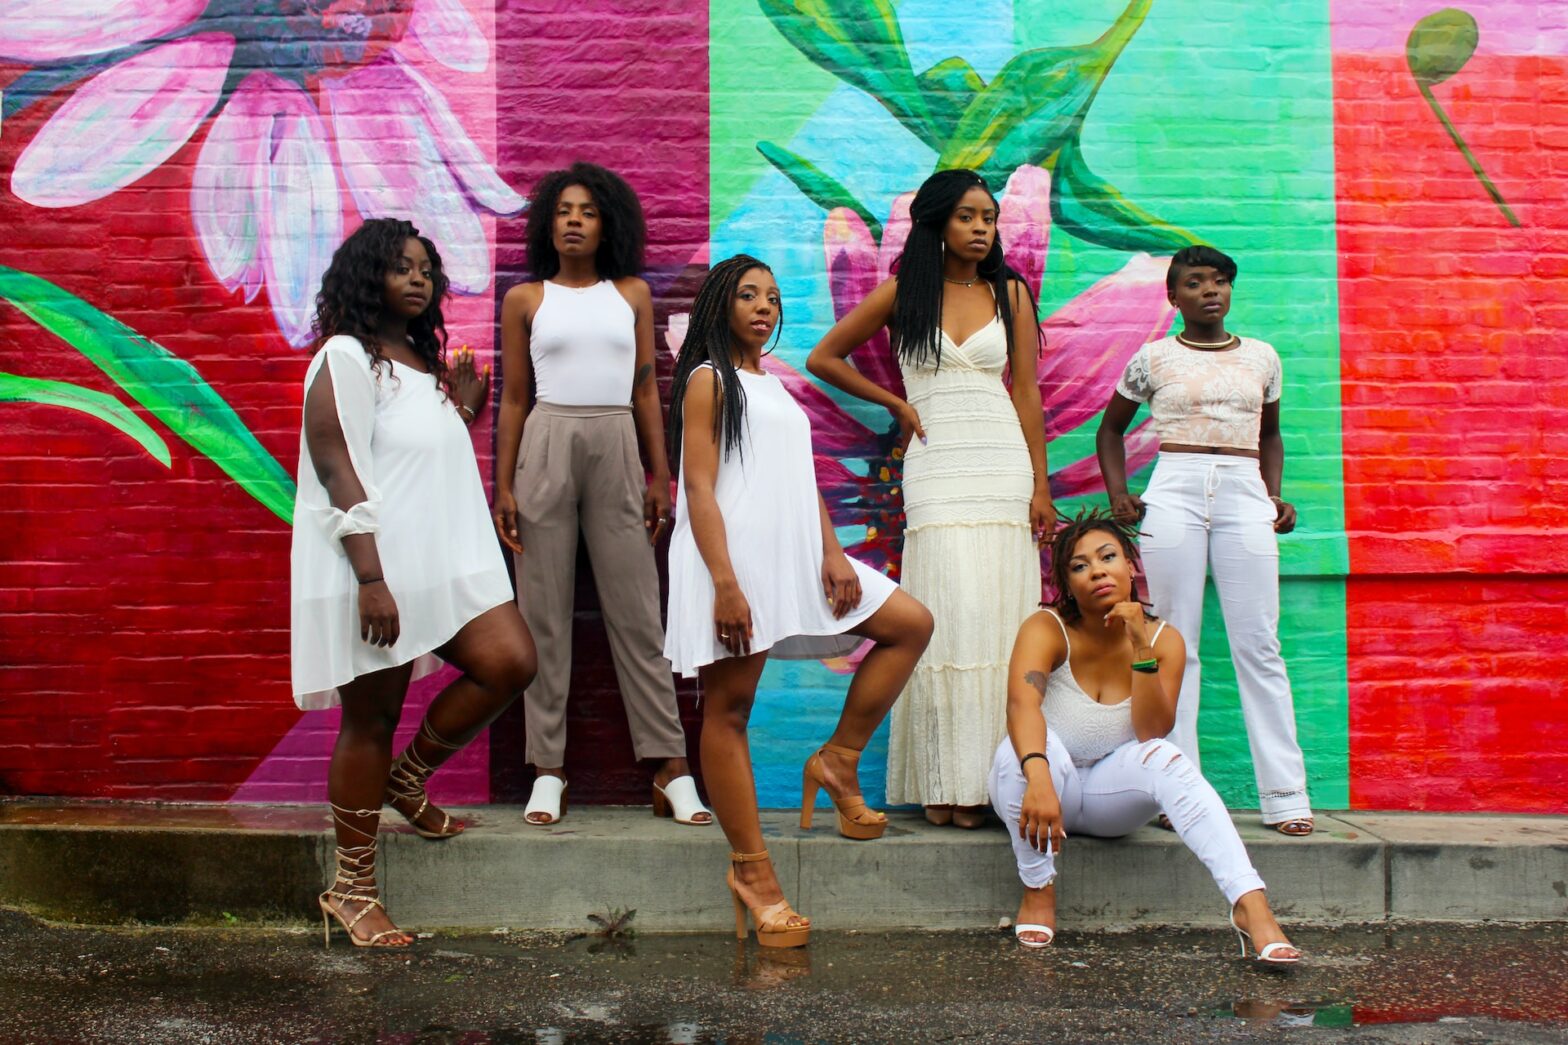 What are some uncommon symptoms of endometriosis? PIctured: a group of black women dressed in white against a colorful wall backdrop.